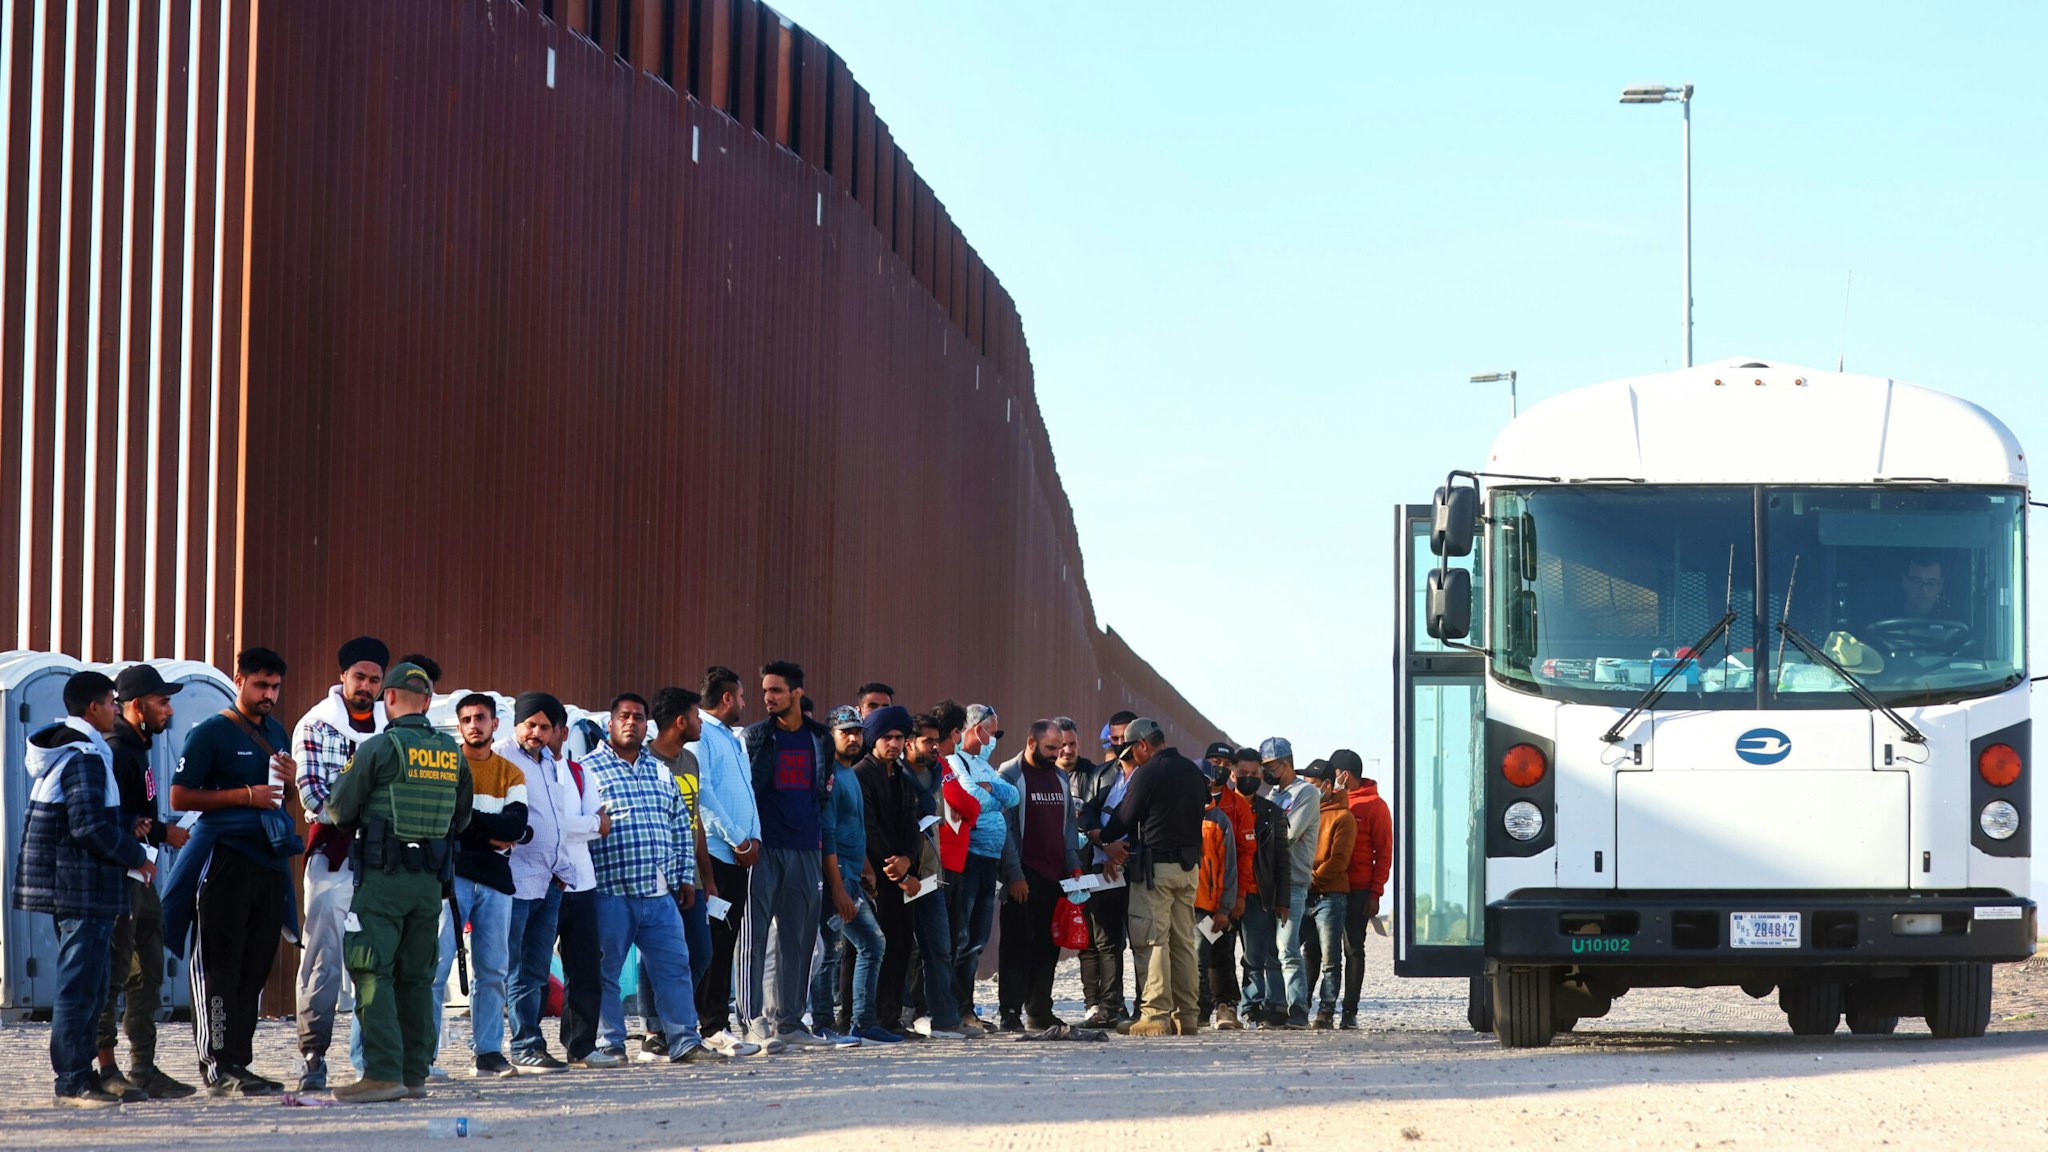 YUMA, ARIZONA - MAY 19: Immigrants wait to board a U.S. Border Patrol bus to be taken for processing after crossing the border from Mexico on May 19, 2022 in Yuma, Arizona. Title 42, the controversial pandemic-era border policy enacted by former President Trump, which cites COVID-19 as the reason to rapidly expel asylum seekers at the U.S. border, is set to officially expire on May 23rd. A federal judge in Louisiana is expected to deliver a ruling this week on whether the Biden administration can lift Title 42.